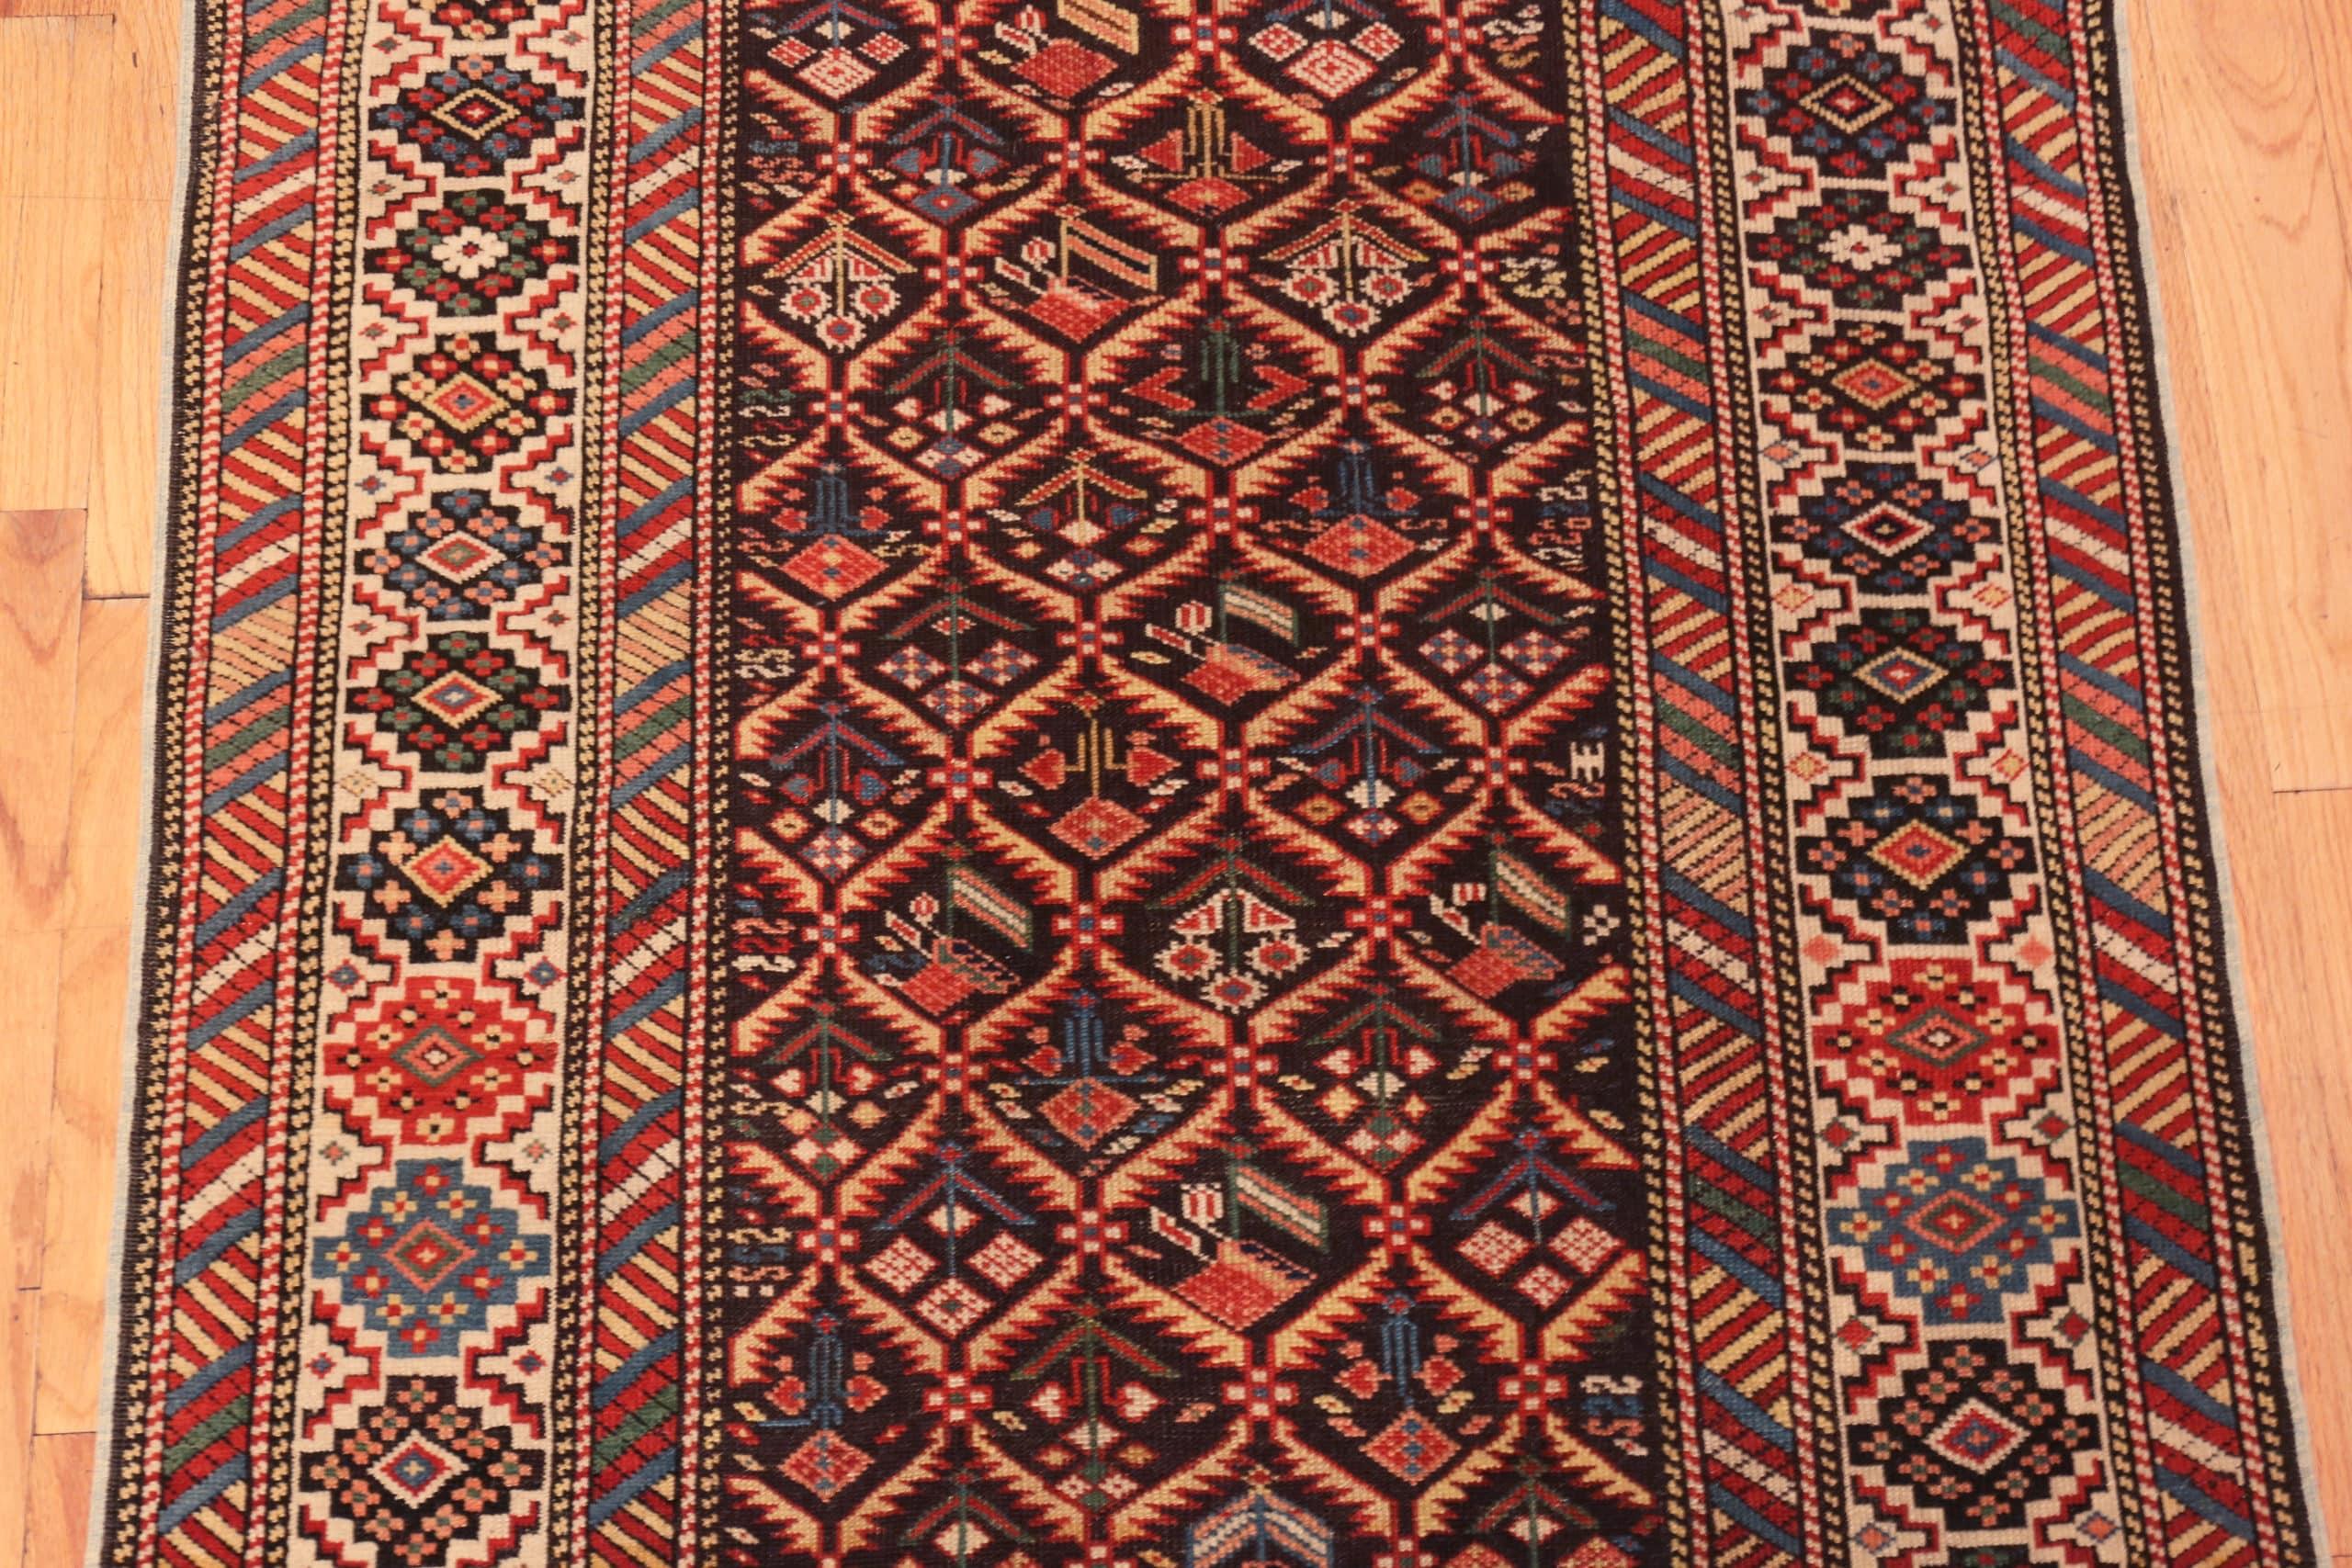 Tribal Nazmiyal Collection Antique Caucasian Shirvan Runner Rug. 3 ft 5 in x 14 ft 2 in